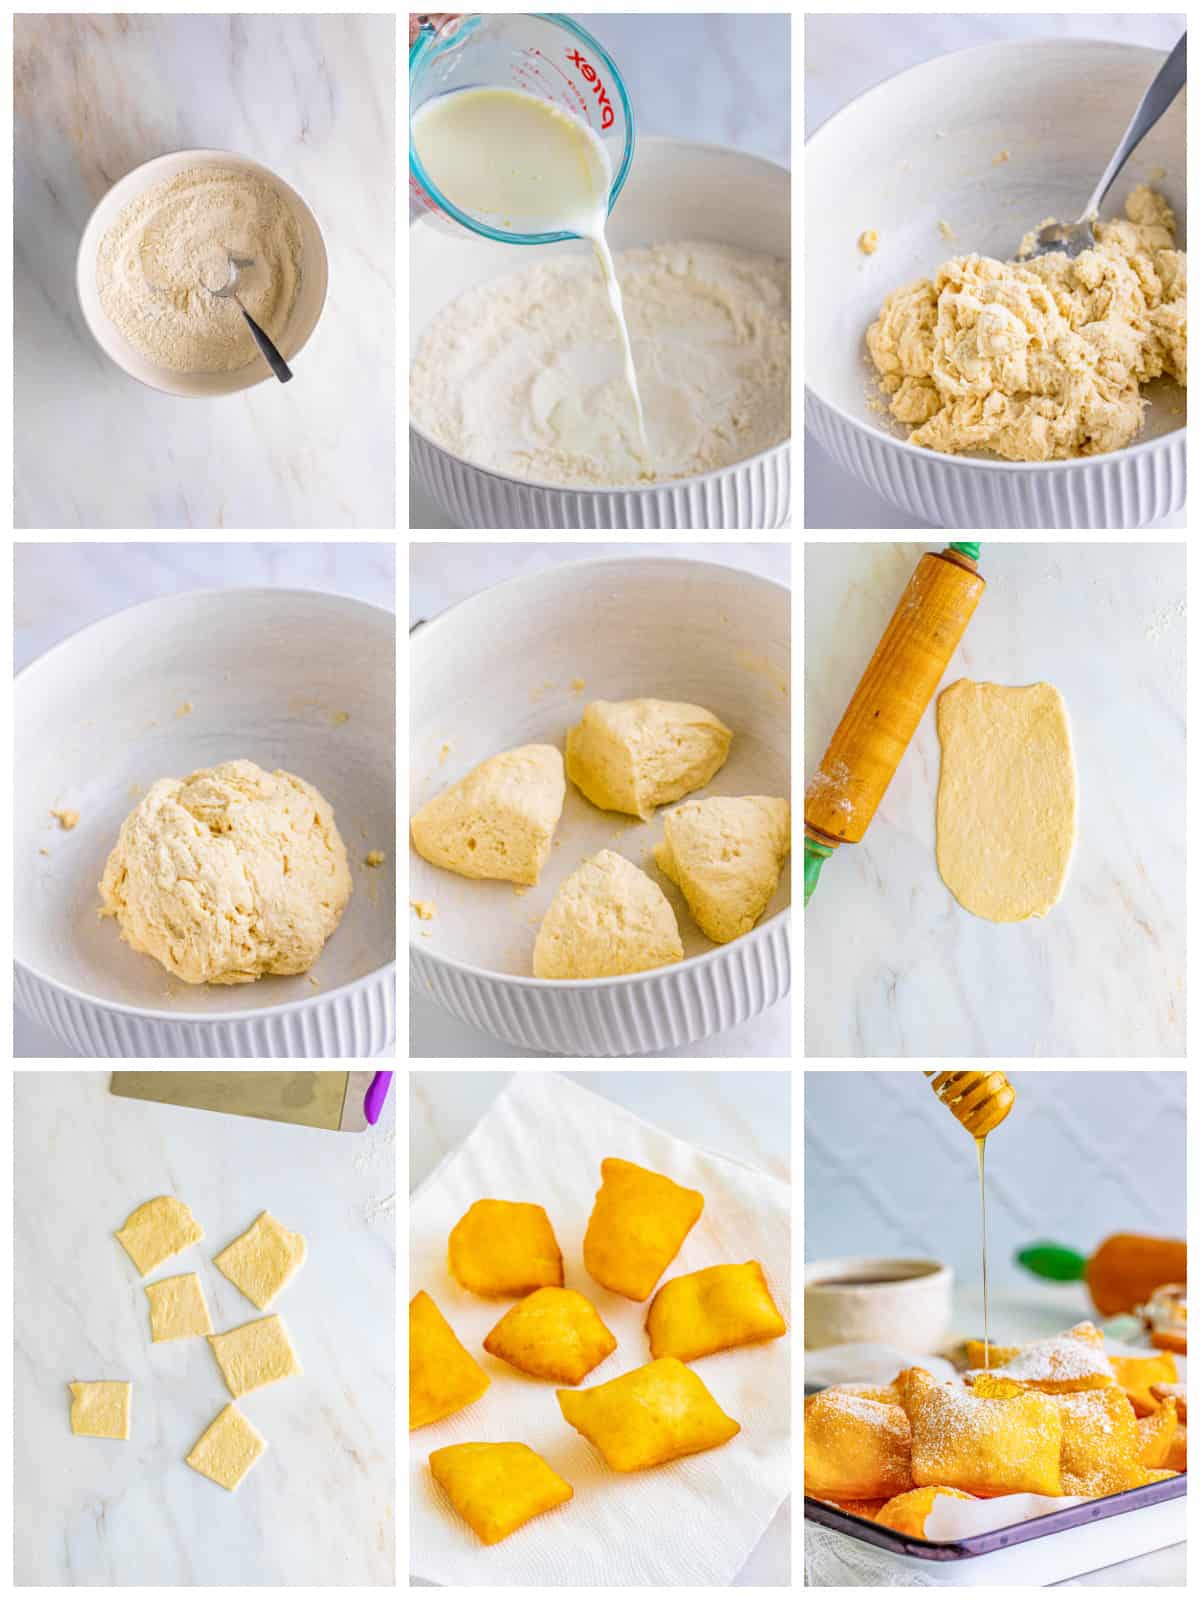 Step by step photos on how to make a Sopapilla Recipe.